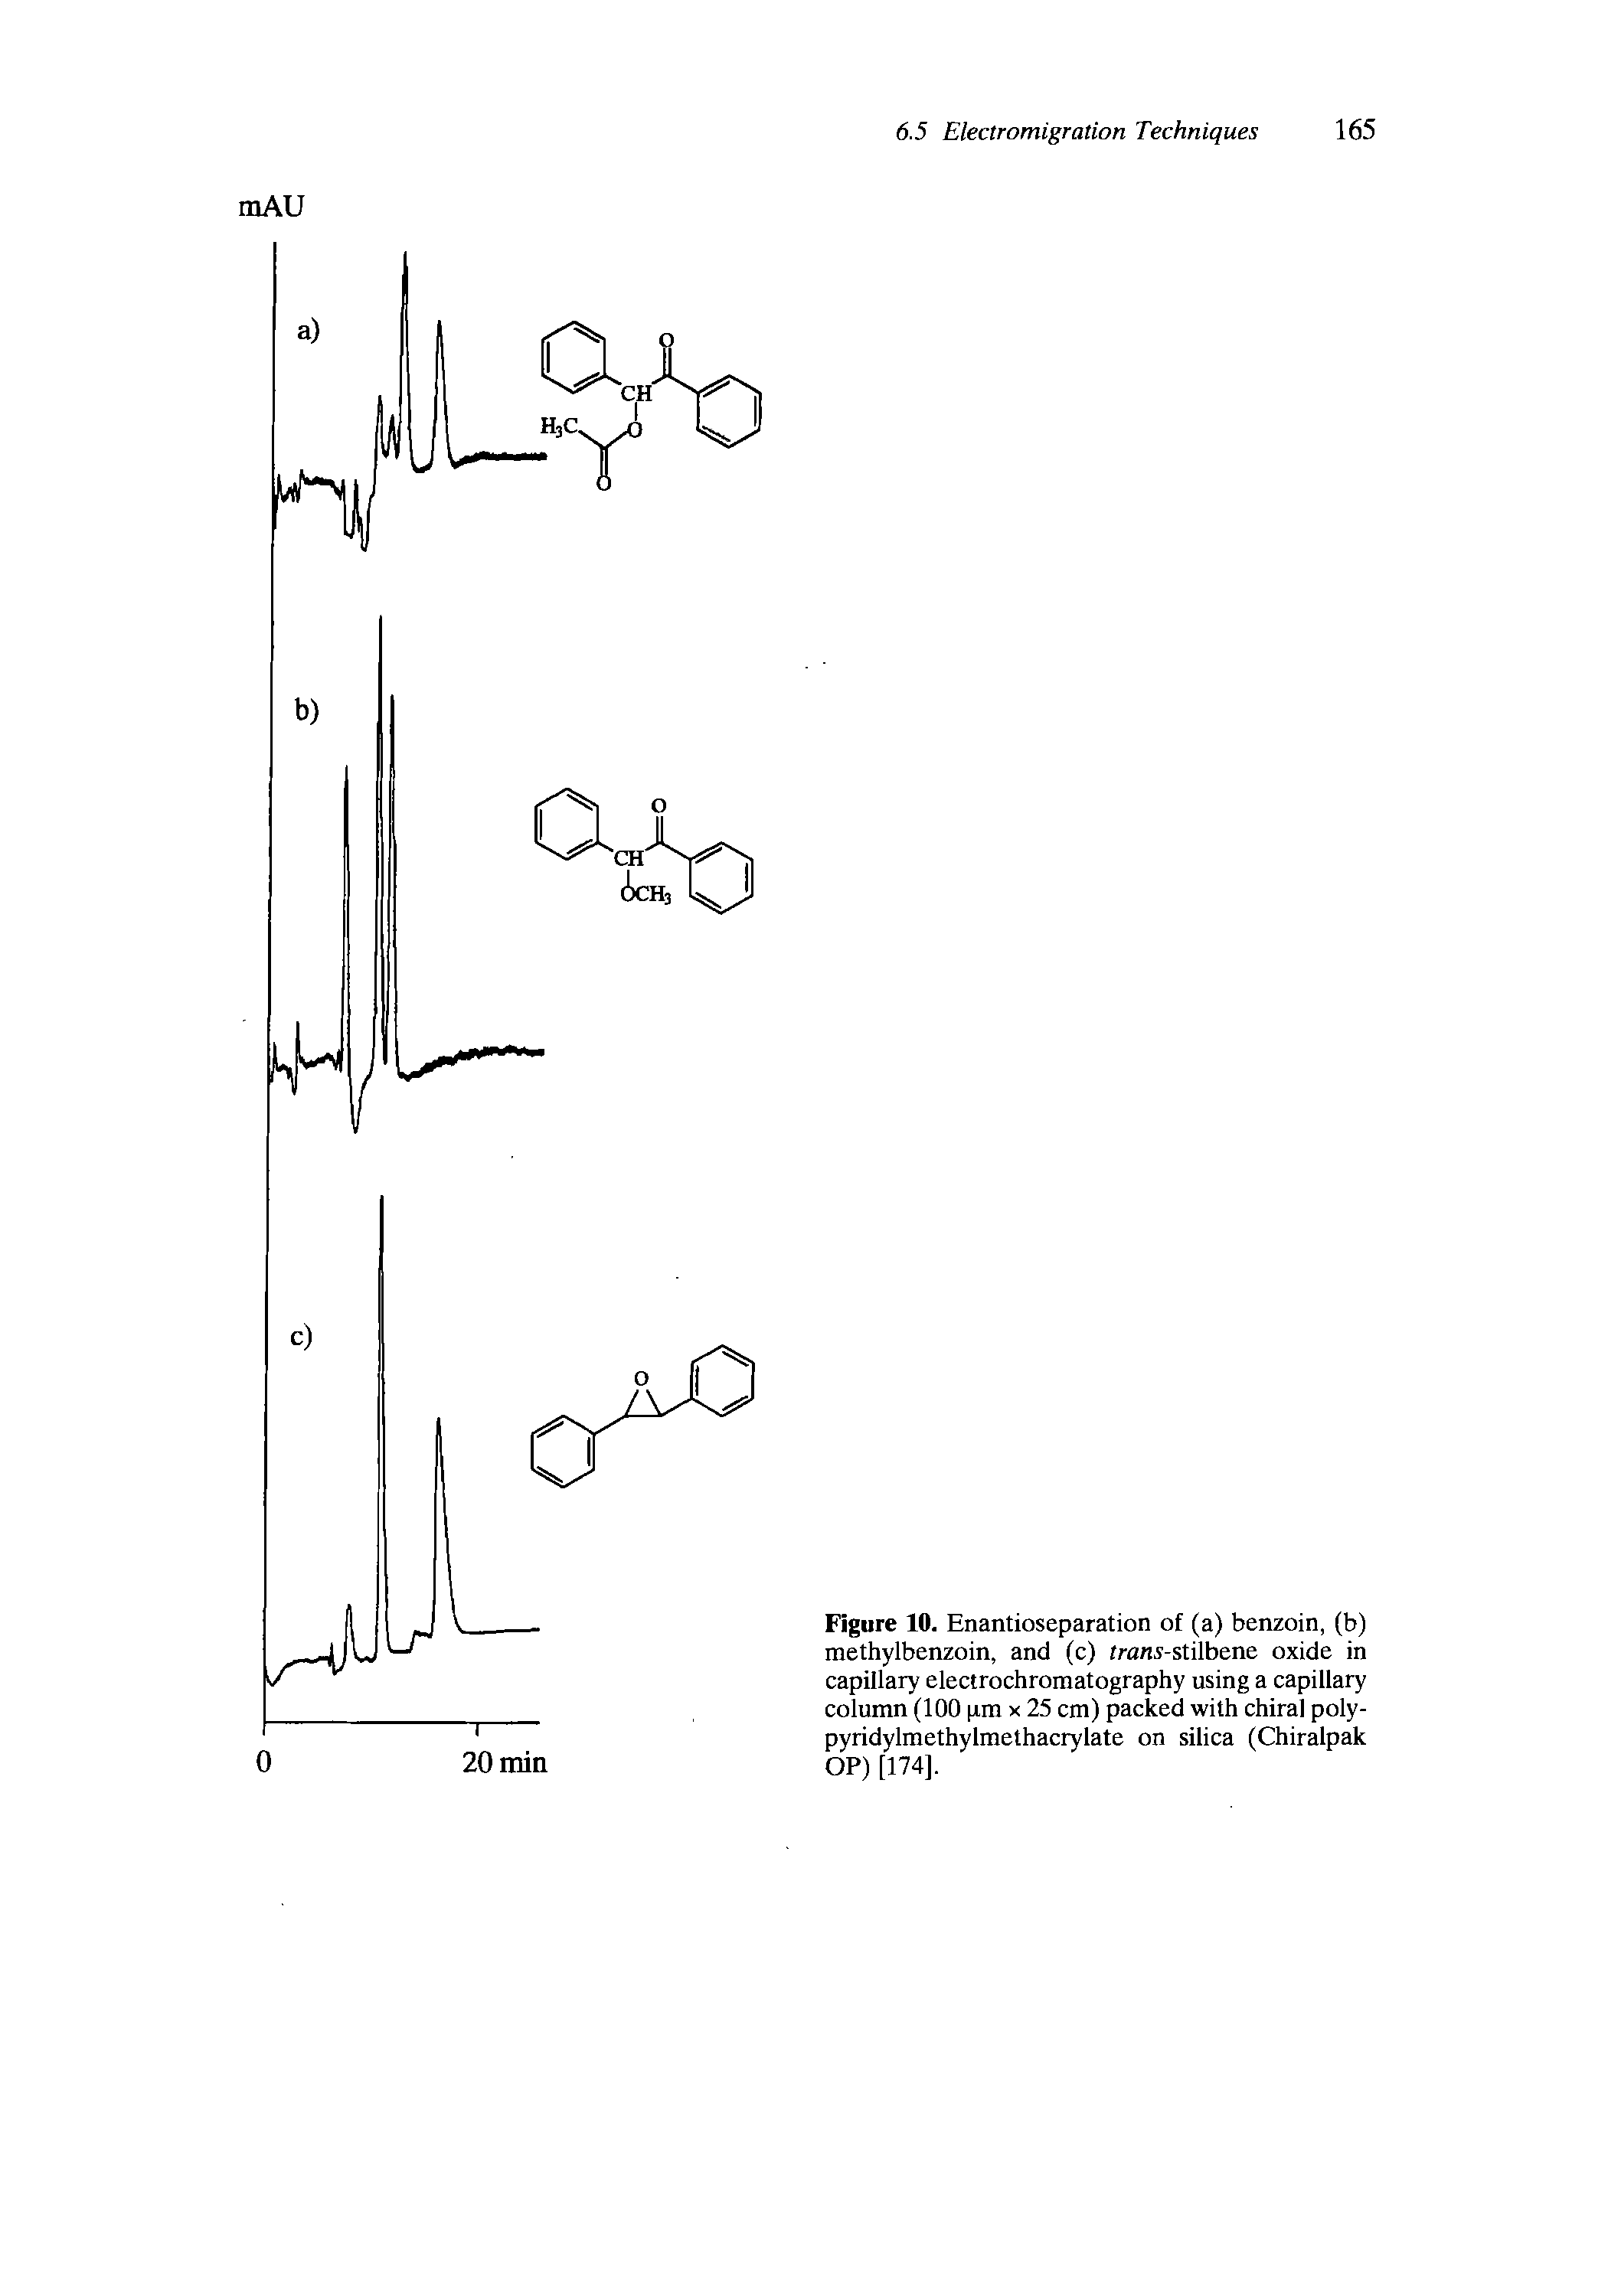 Figure 10. Enantioseparation of (a) benzoin, (b) methylbenzoin, and (c) trans-stilbene oxide in capillary electrochromatography using a capillary column (100 pm x 25 cm) packed with chiral poly-pyridylmethylmethacrylate on silica (Chiralpak OP) [174],...